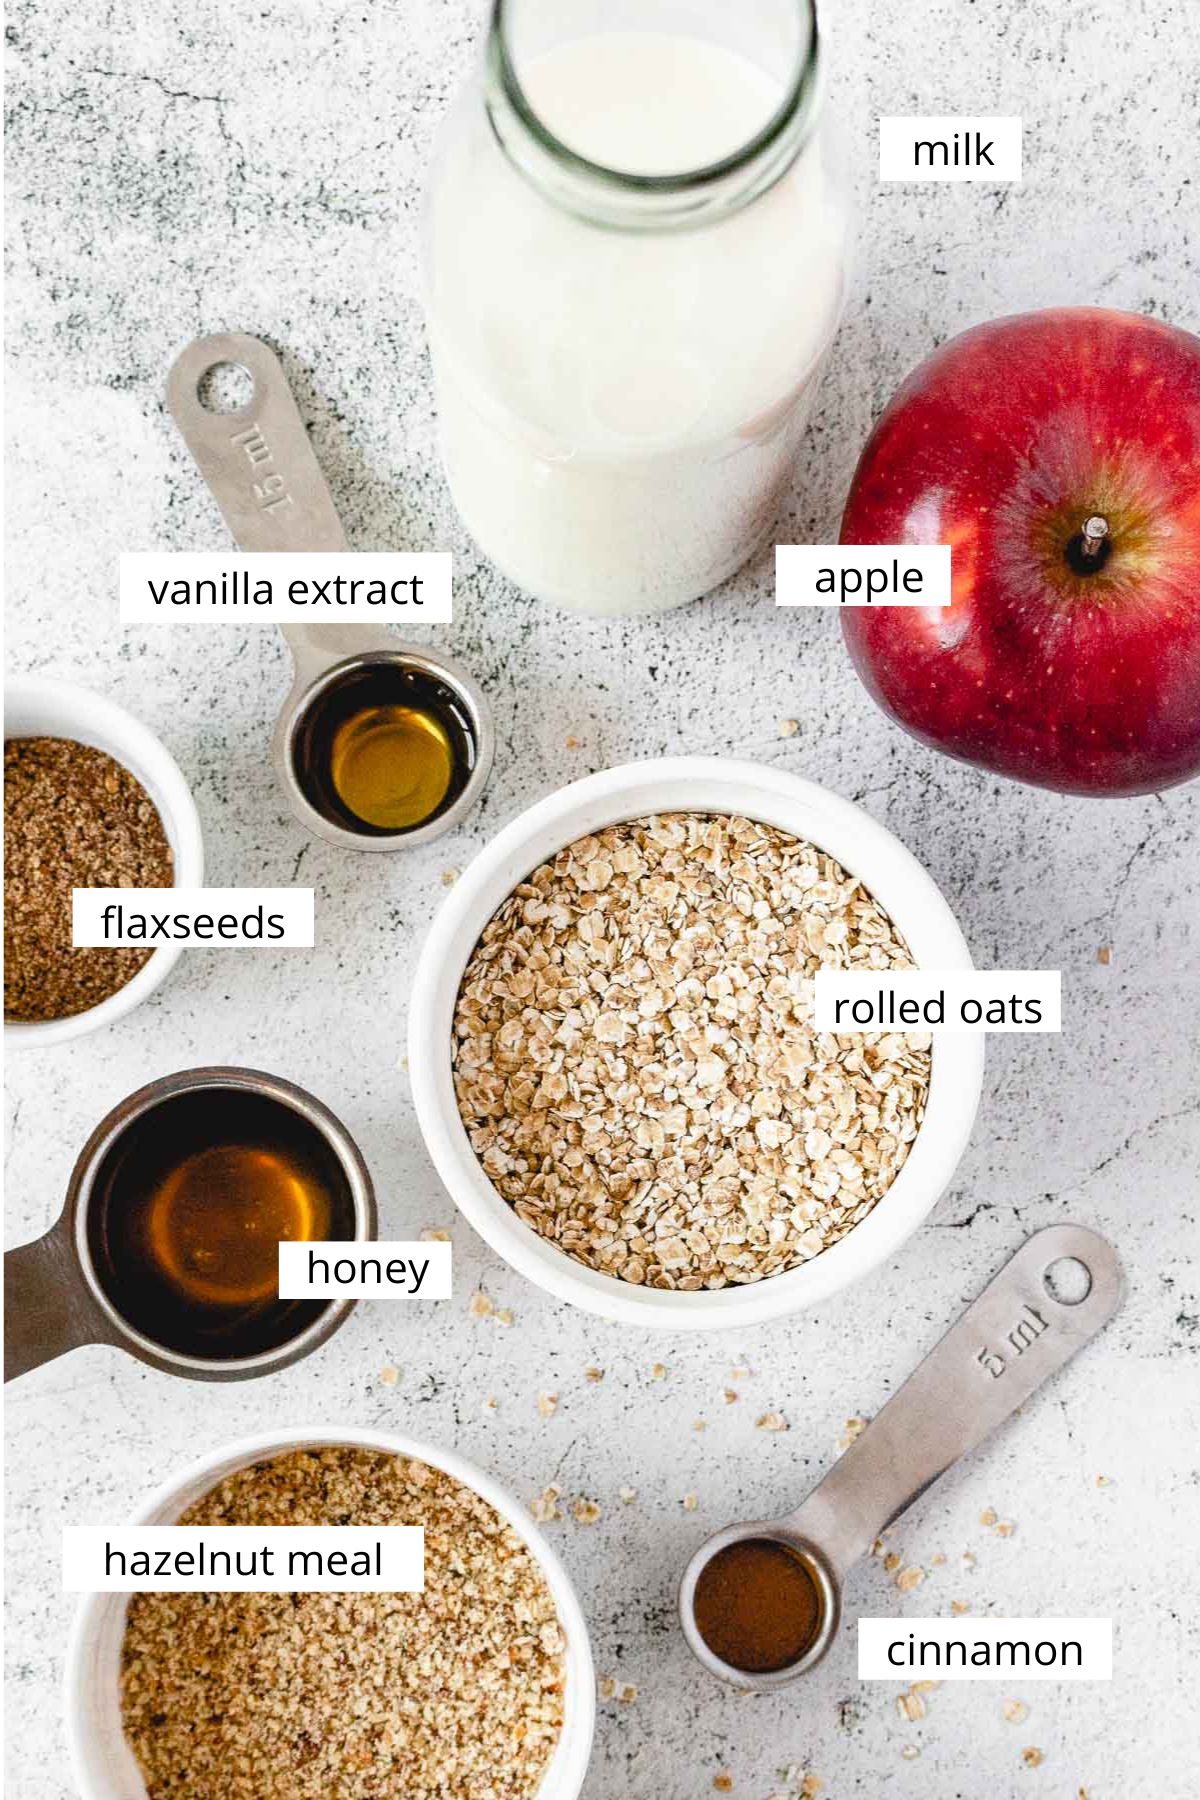 ingredients for apple cinnamon oatmeal on light grey background.